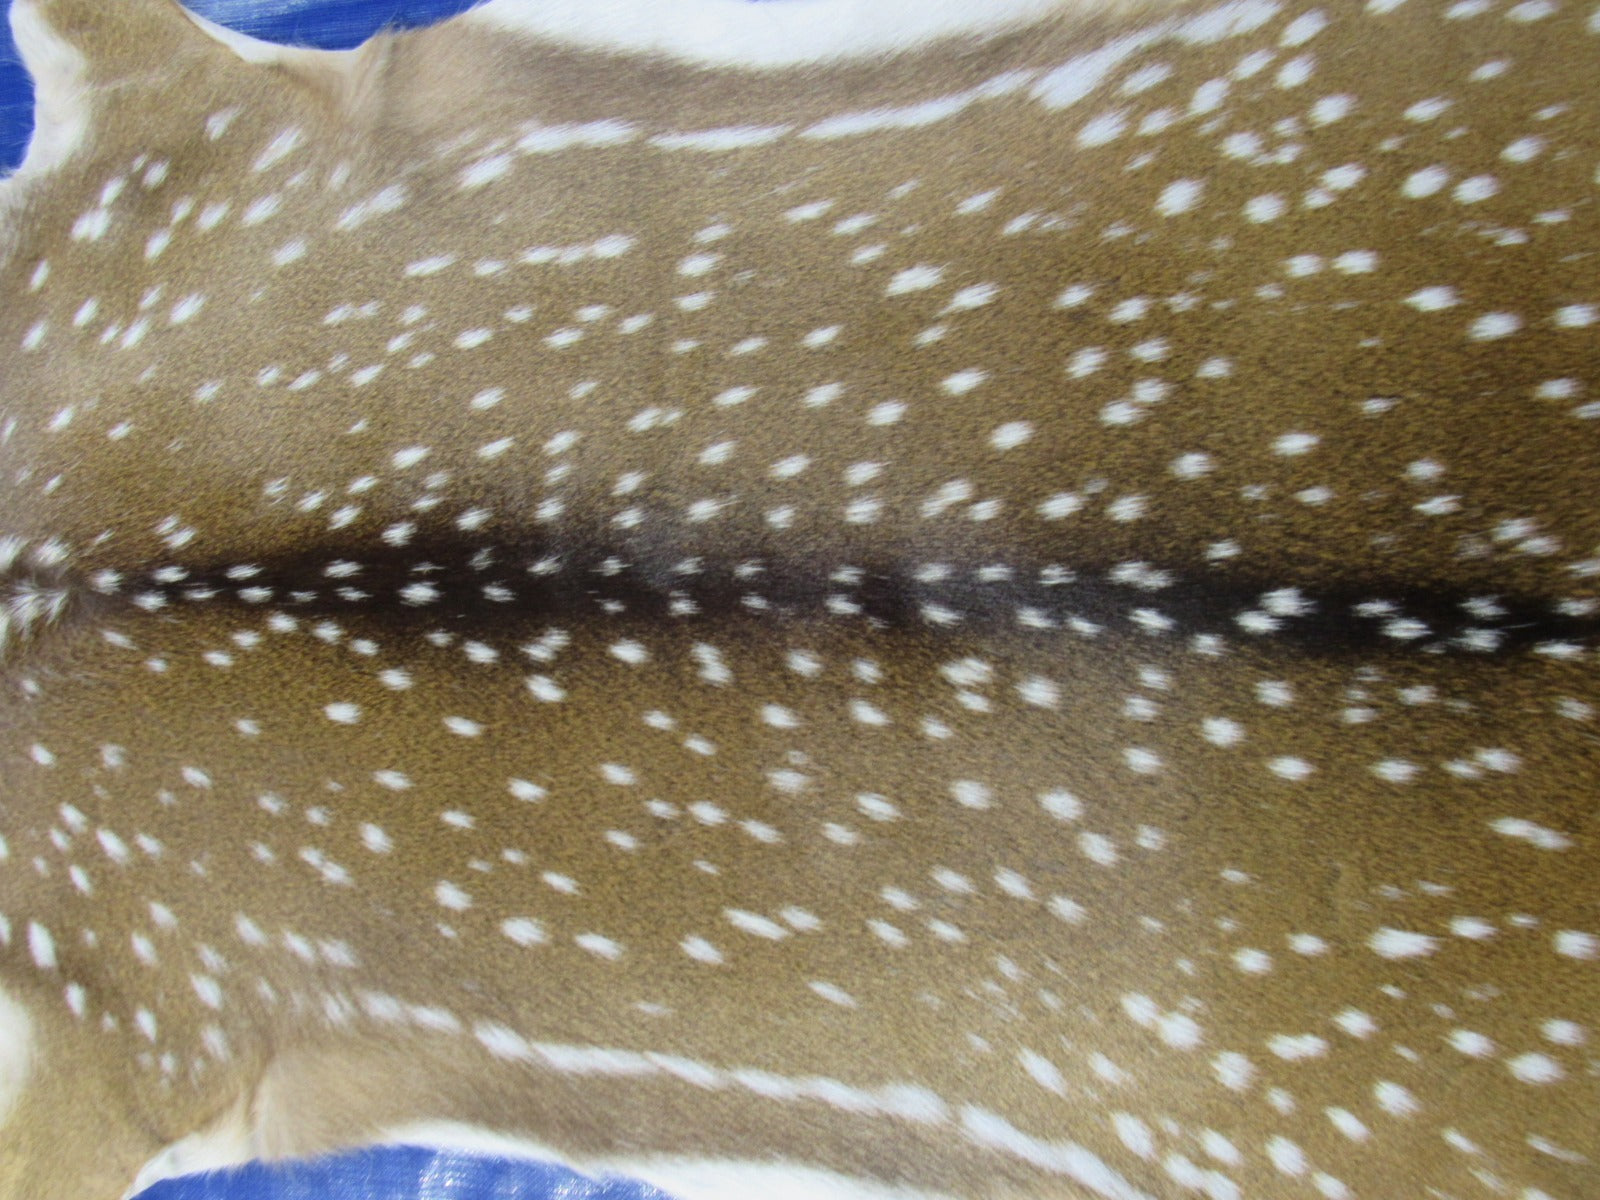 Top quality Axis Deer Skin (no holes) Size: 43x37" Axis-713